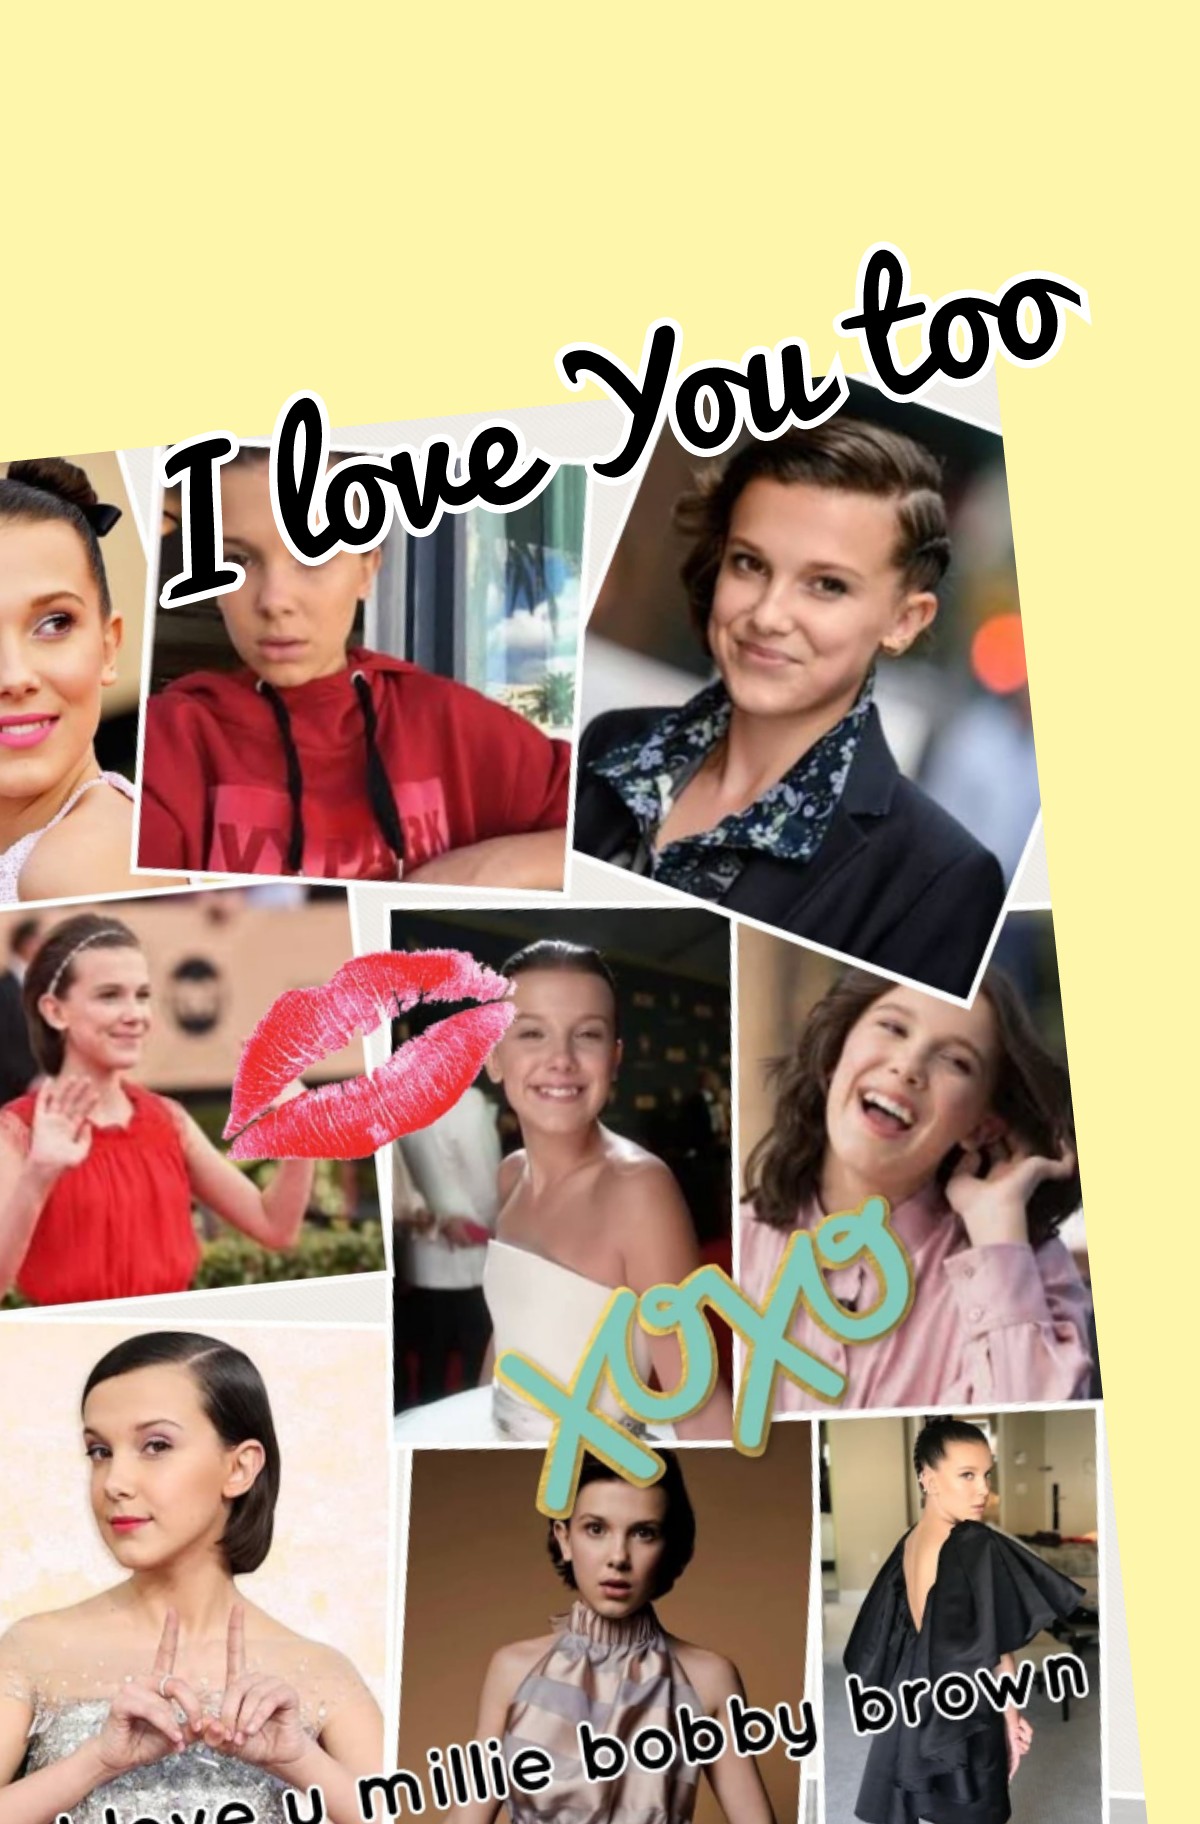 Collage by Millie_BobbyBrown